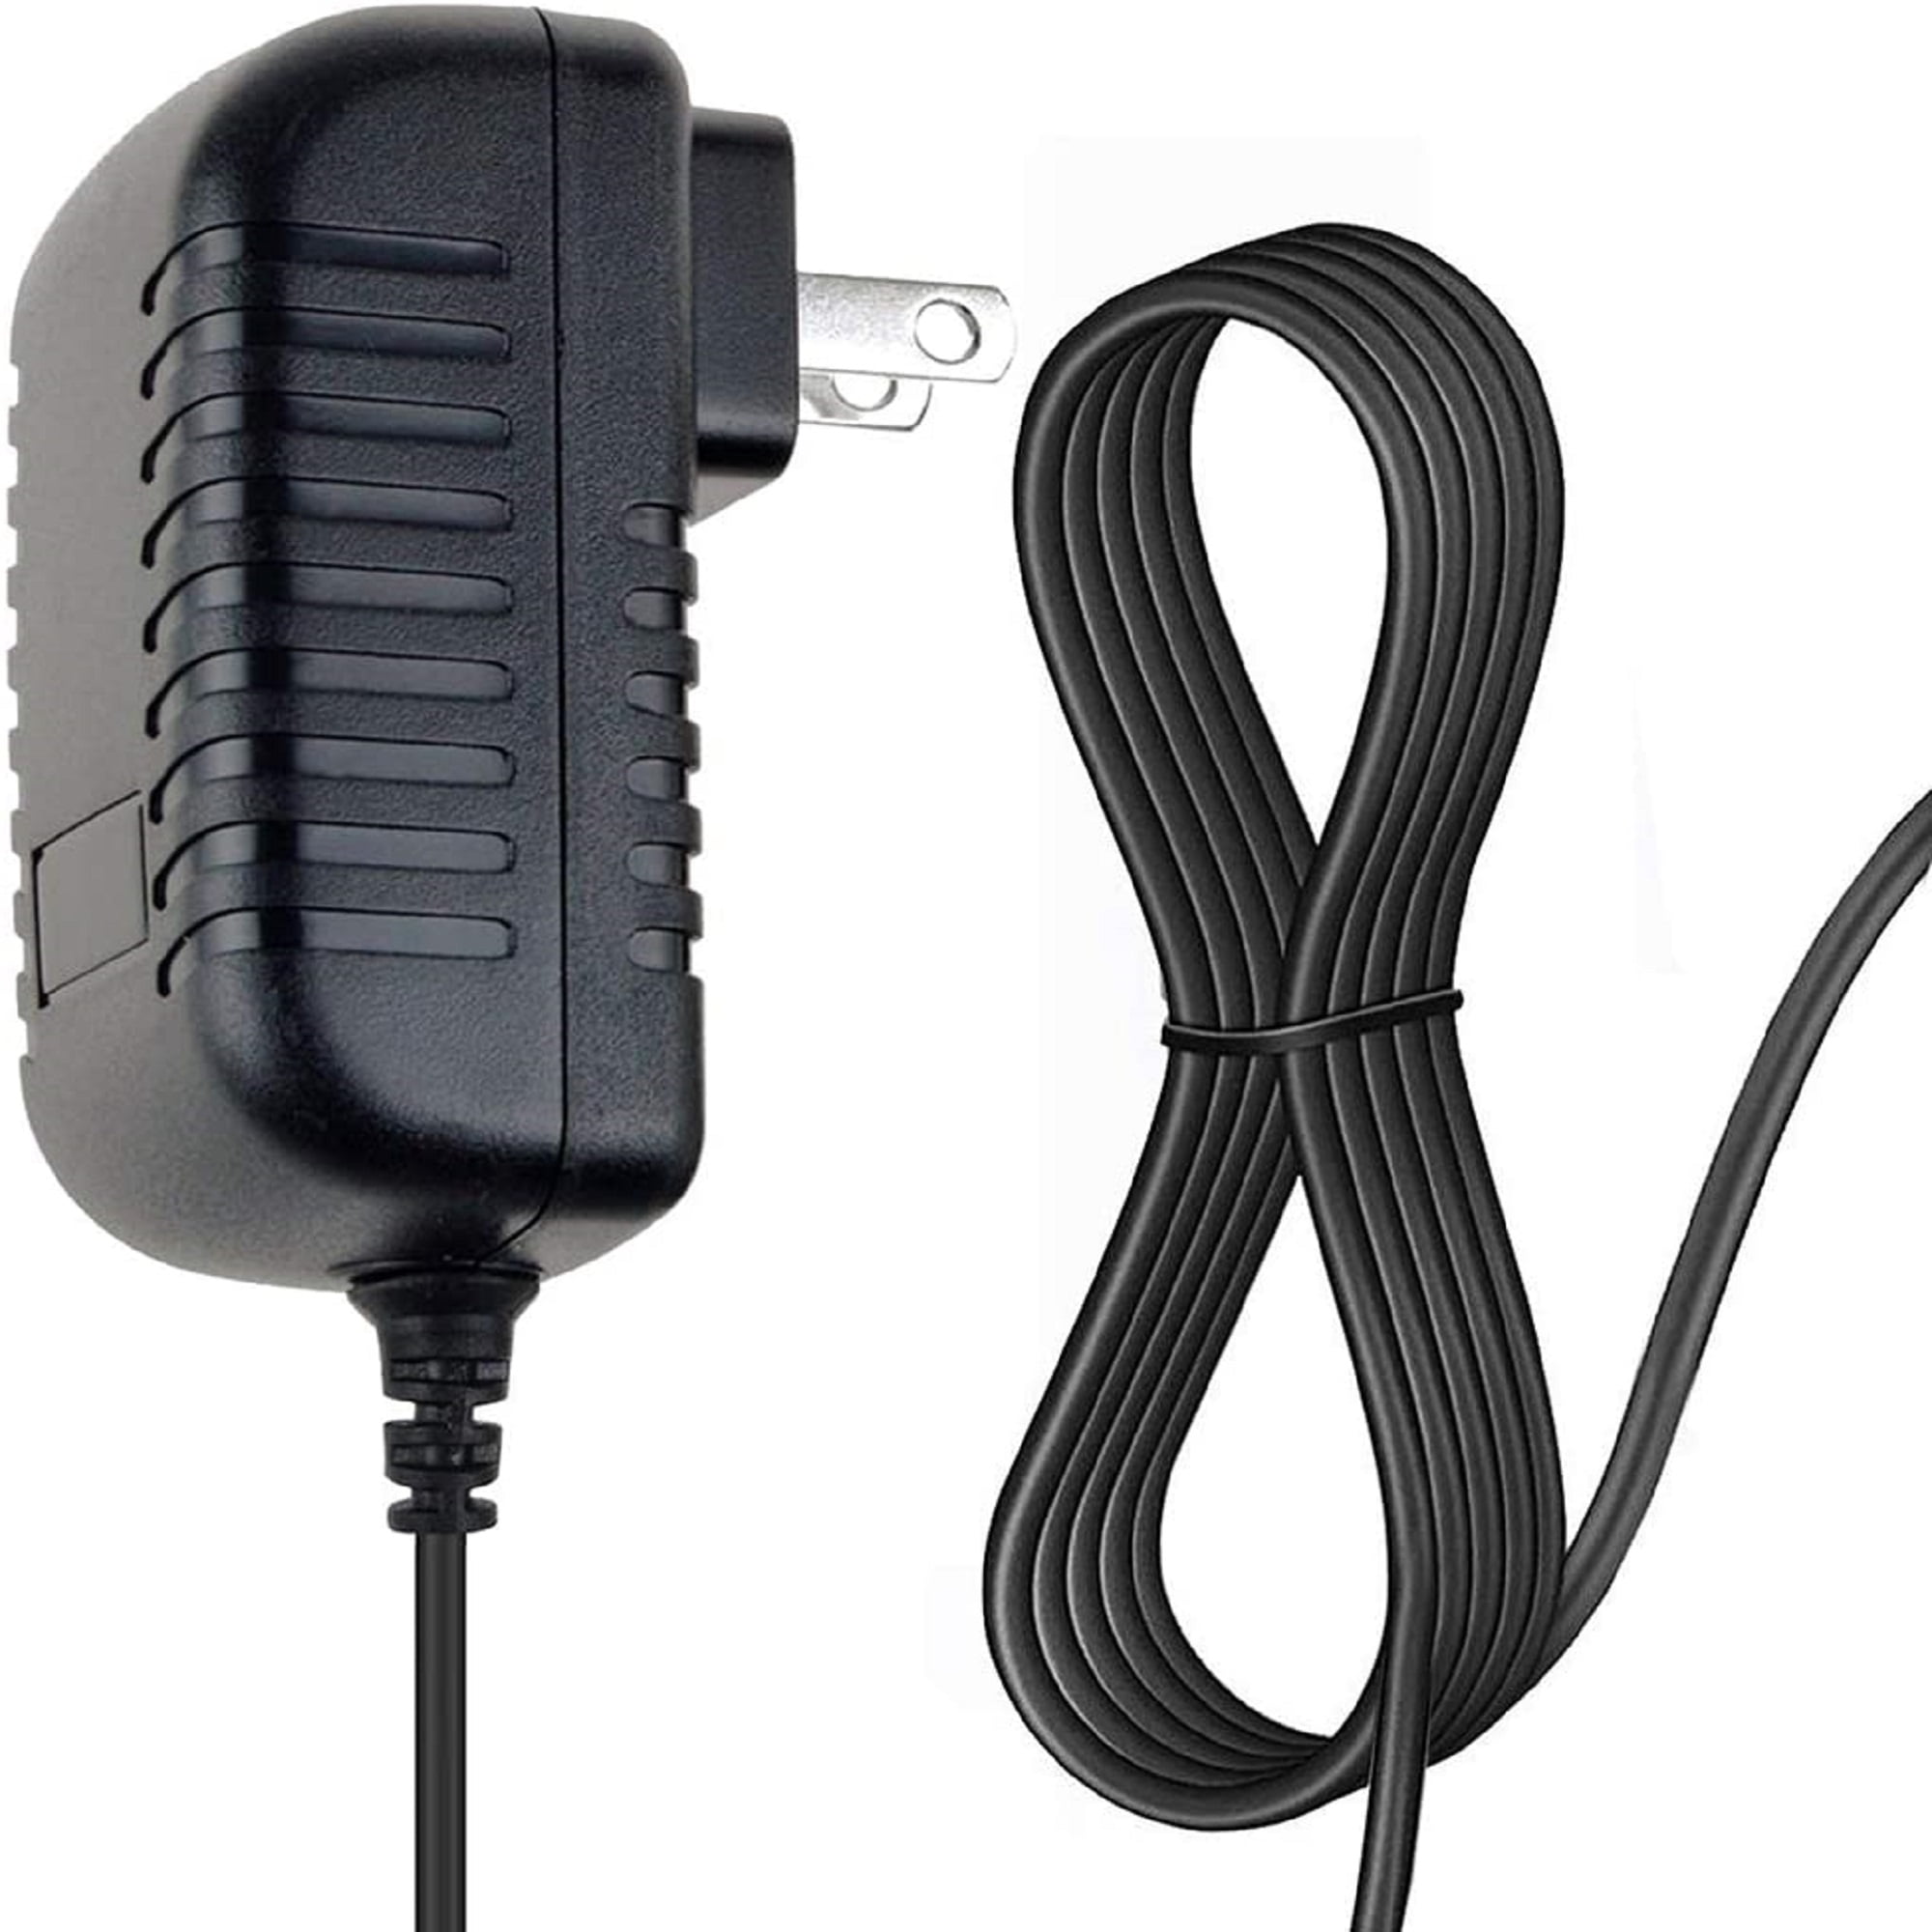 DC Charger for Visioneer Strobe 500 STROBE-500-SA Scanner Power Cord PSU Adapter 